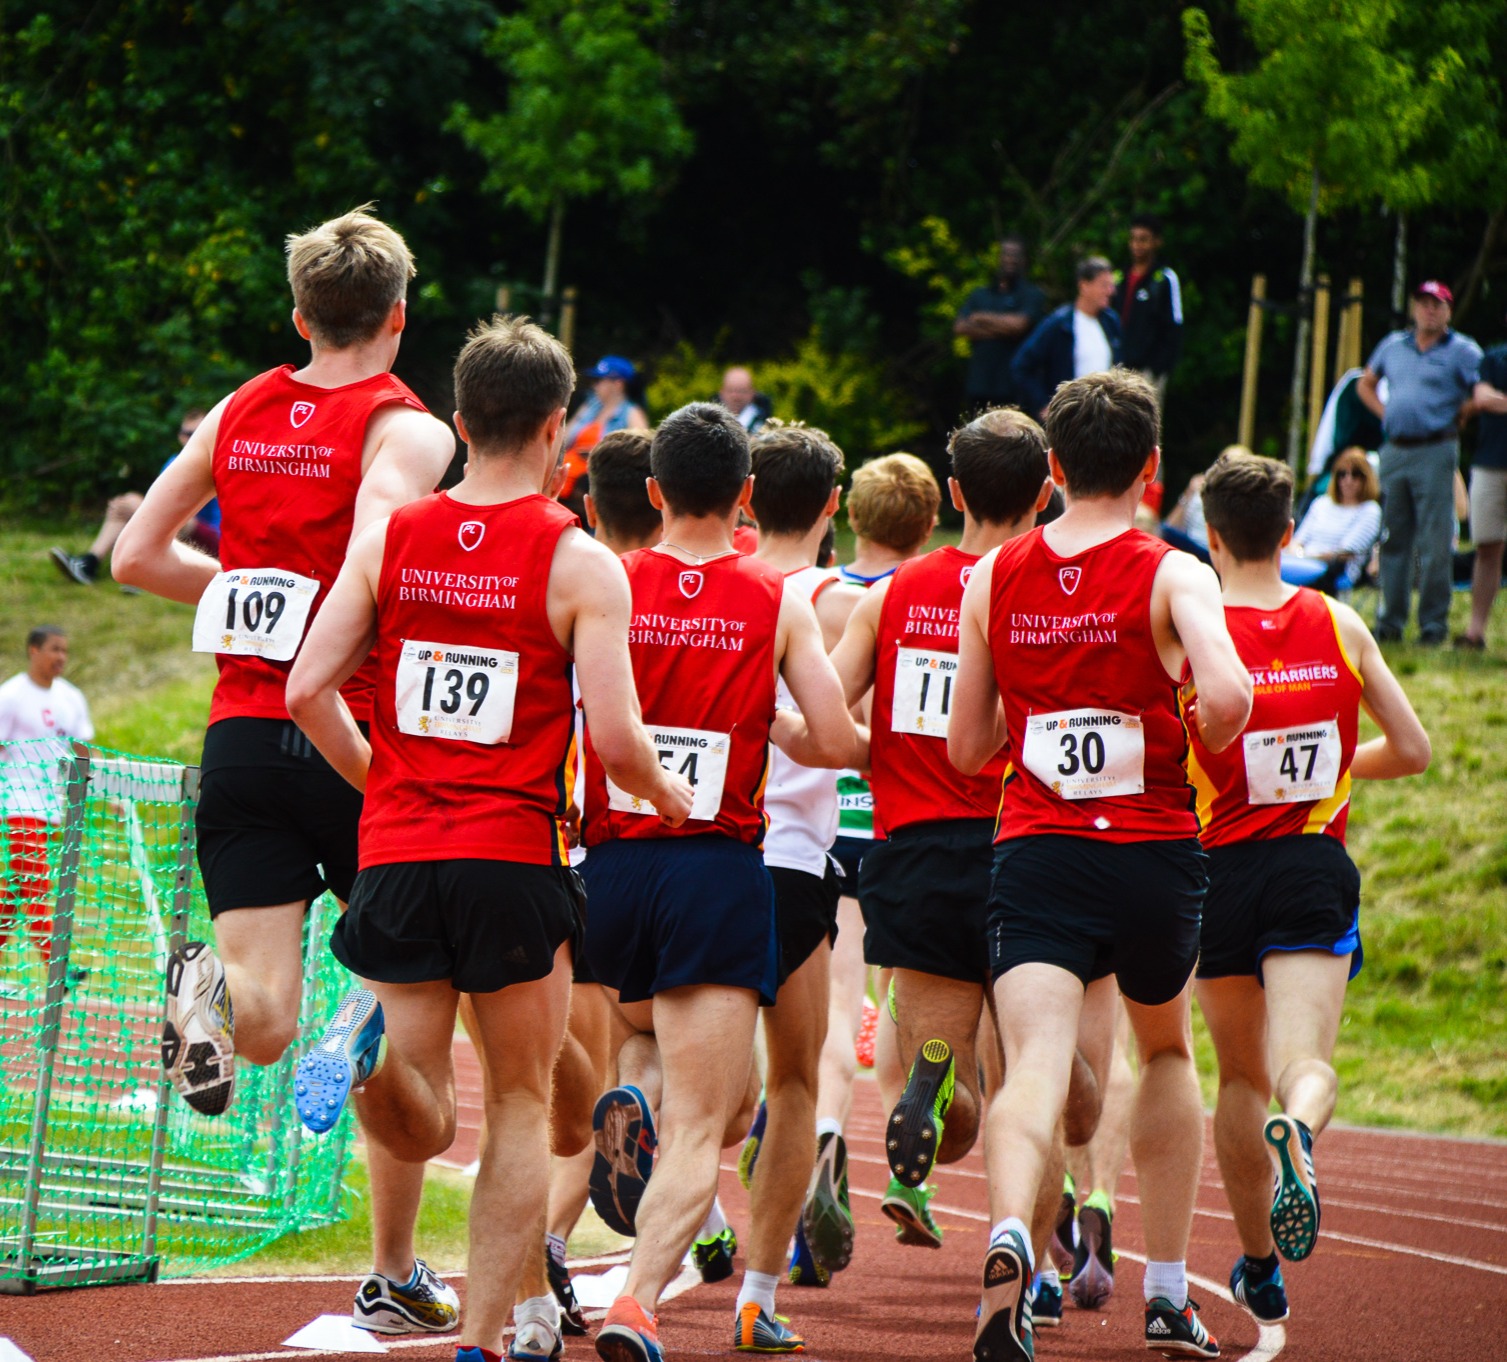 group of UoB runners taking part in a track race